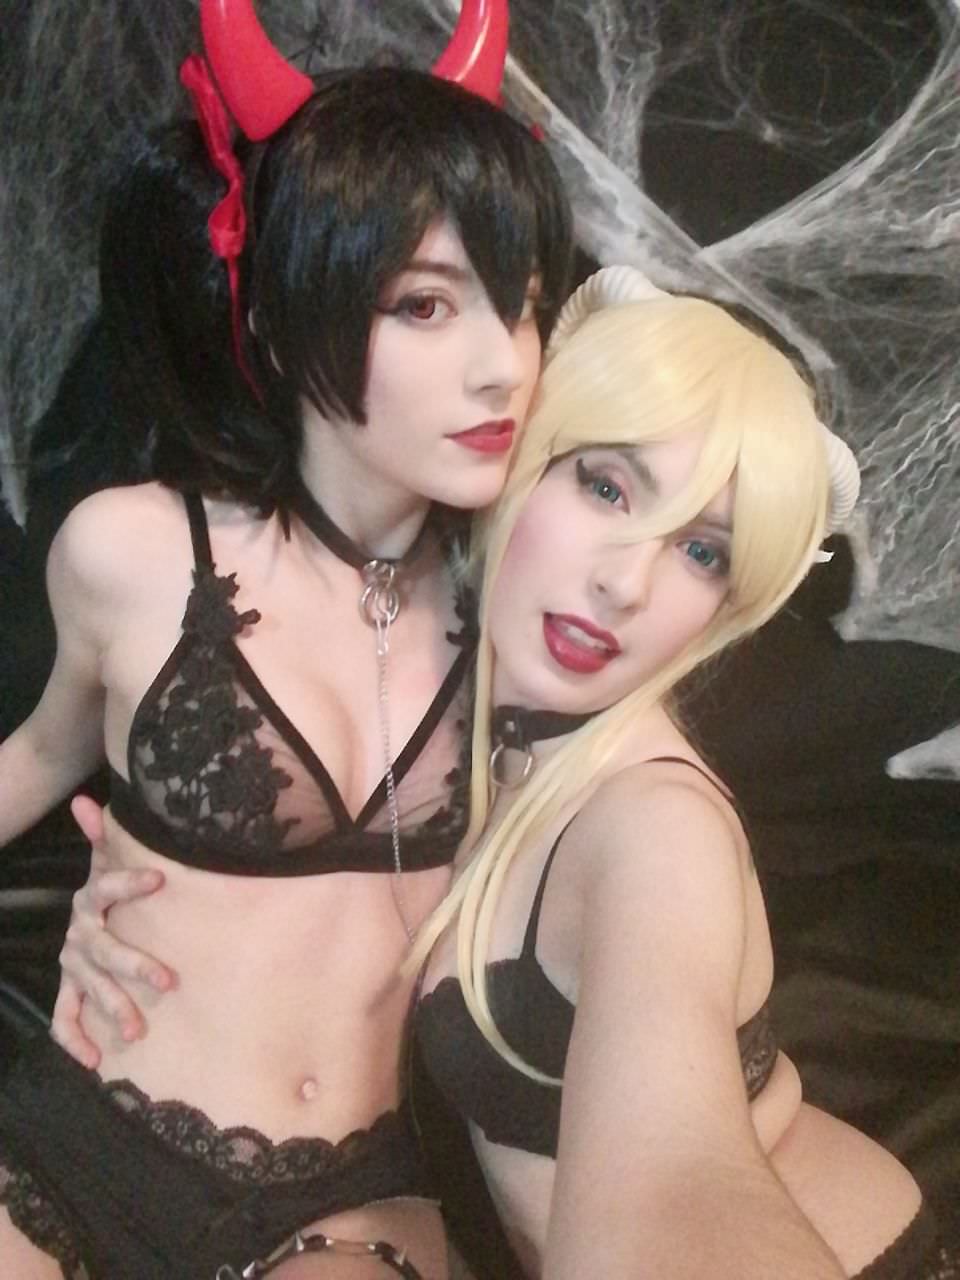 Self Happy Hallewdween Will You Join Nico And Eli Or Will You Ru